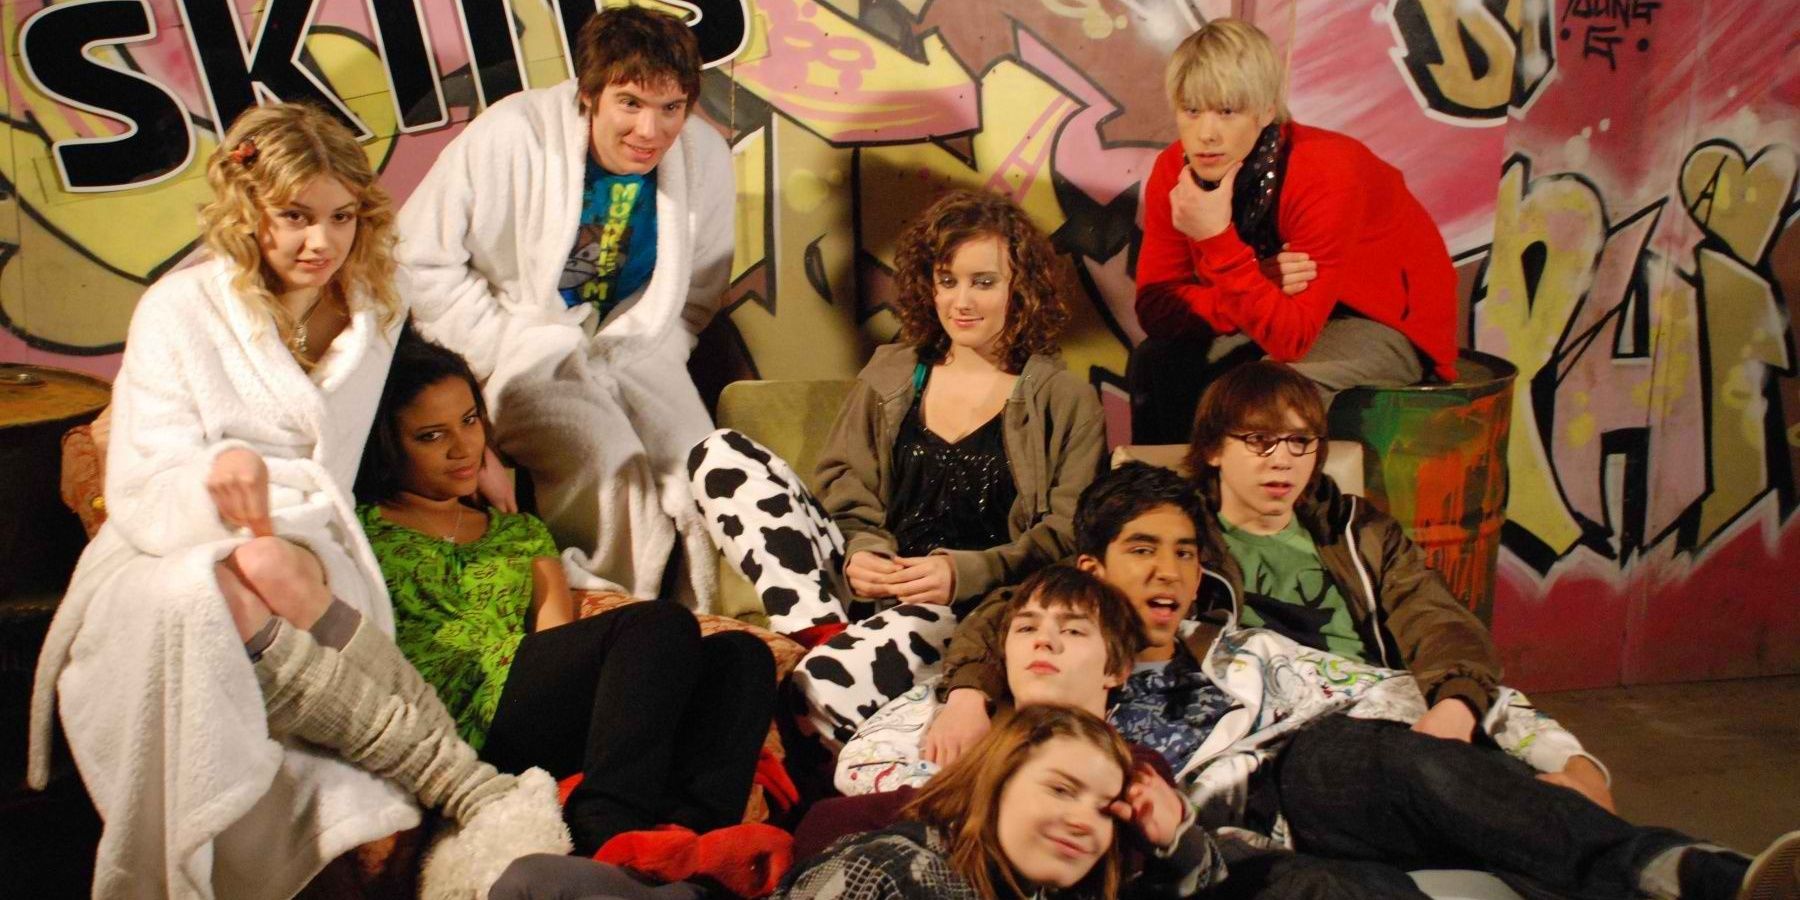 A promotional image of the nine main cast members of the first generation of Skins for Season 2 in front of a wall of graffiti